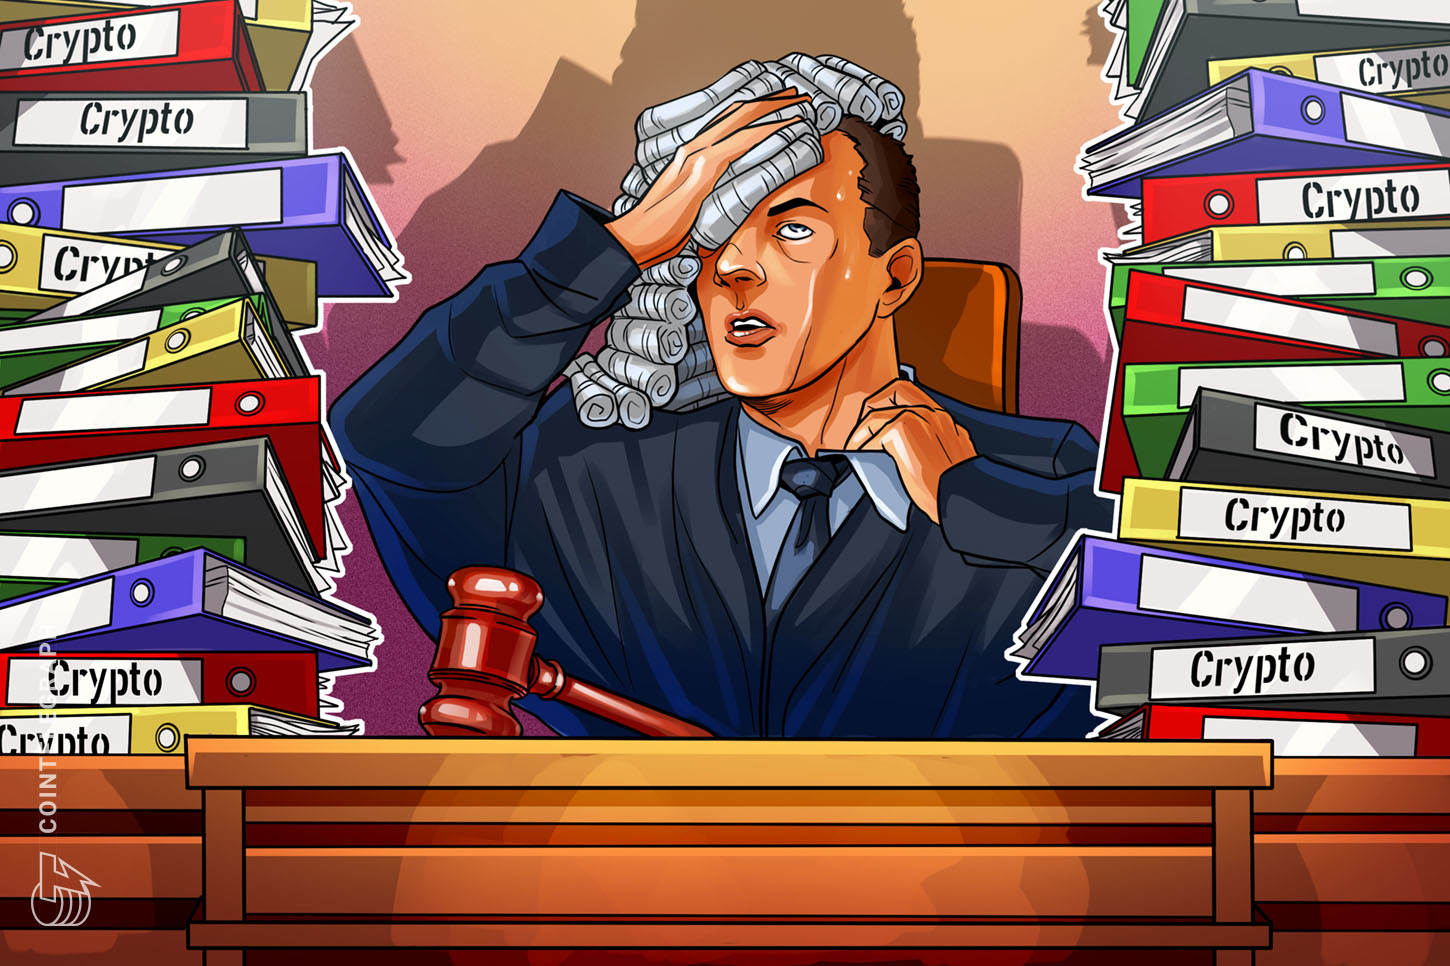 One other courtroom applies the Howey funding contract evaluation to crypto